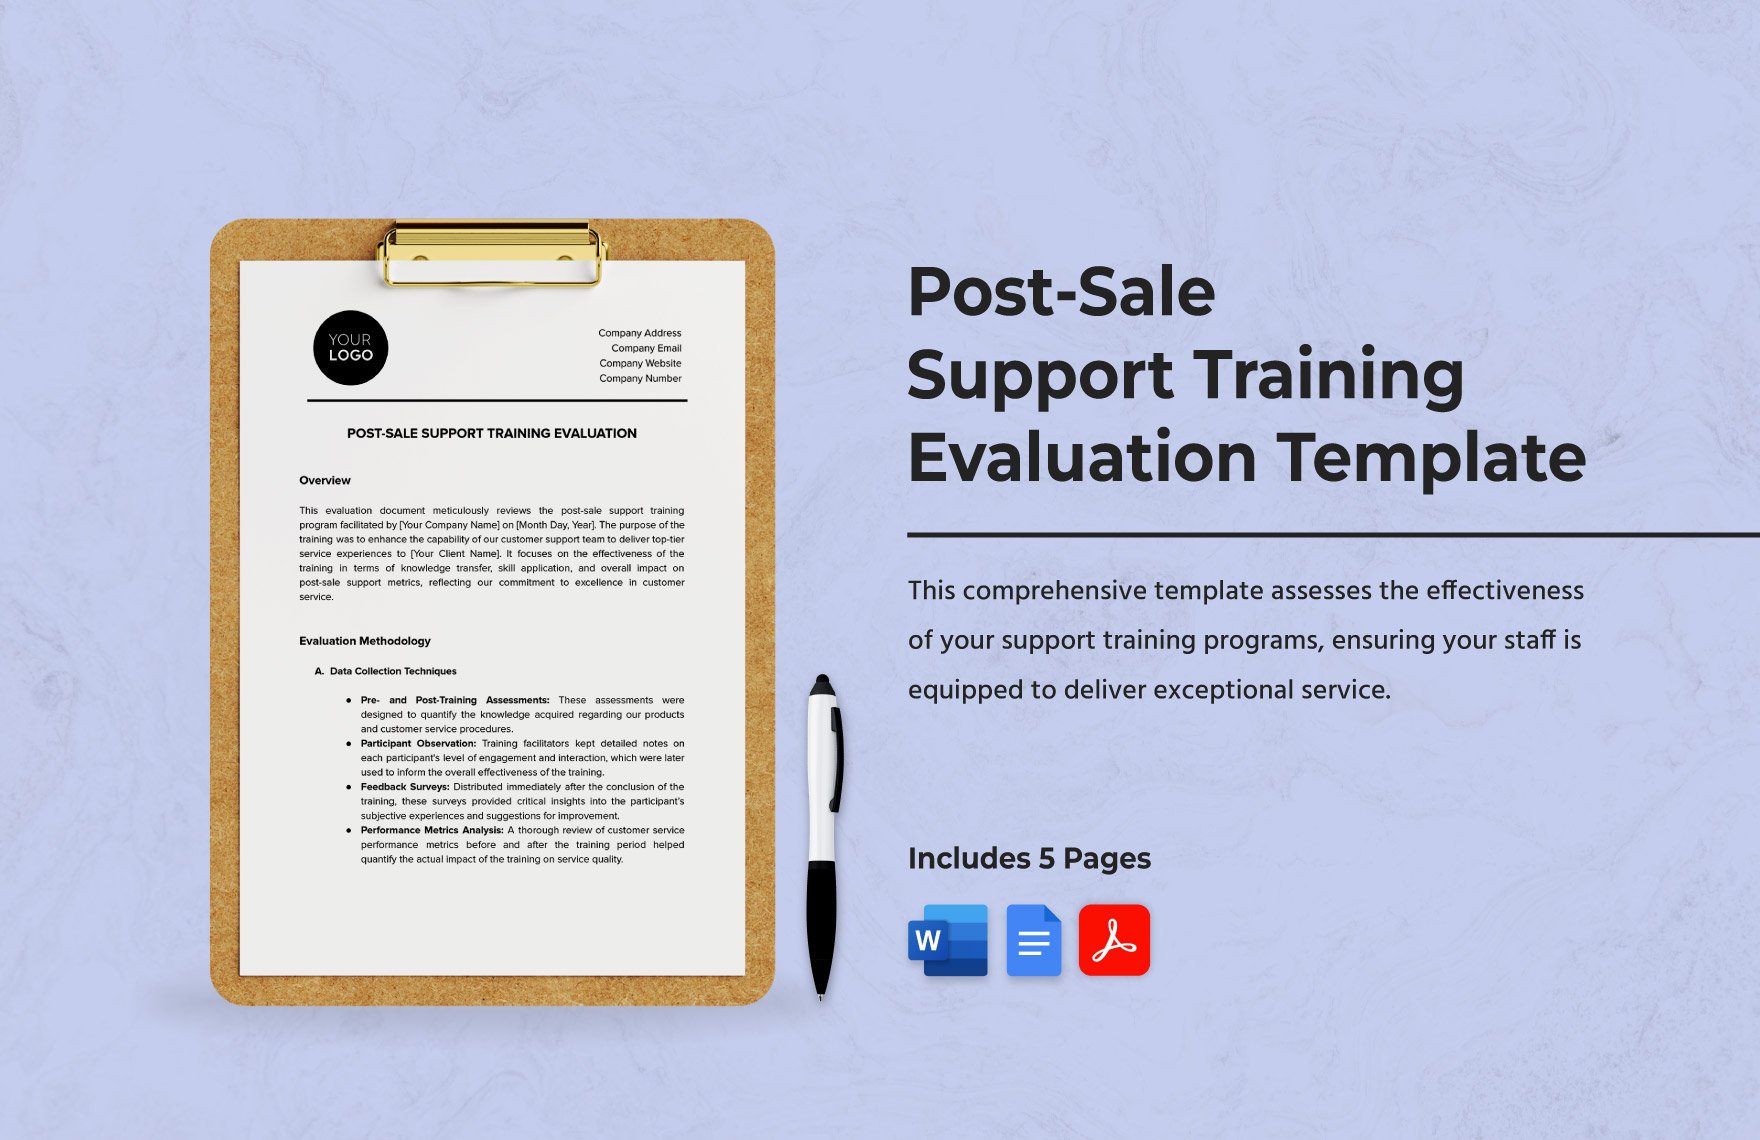 Post-Sale Support Training Evaluation Template